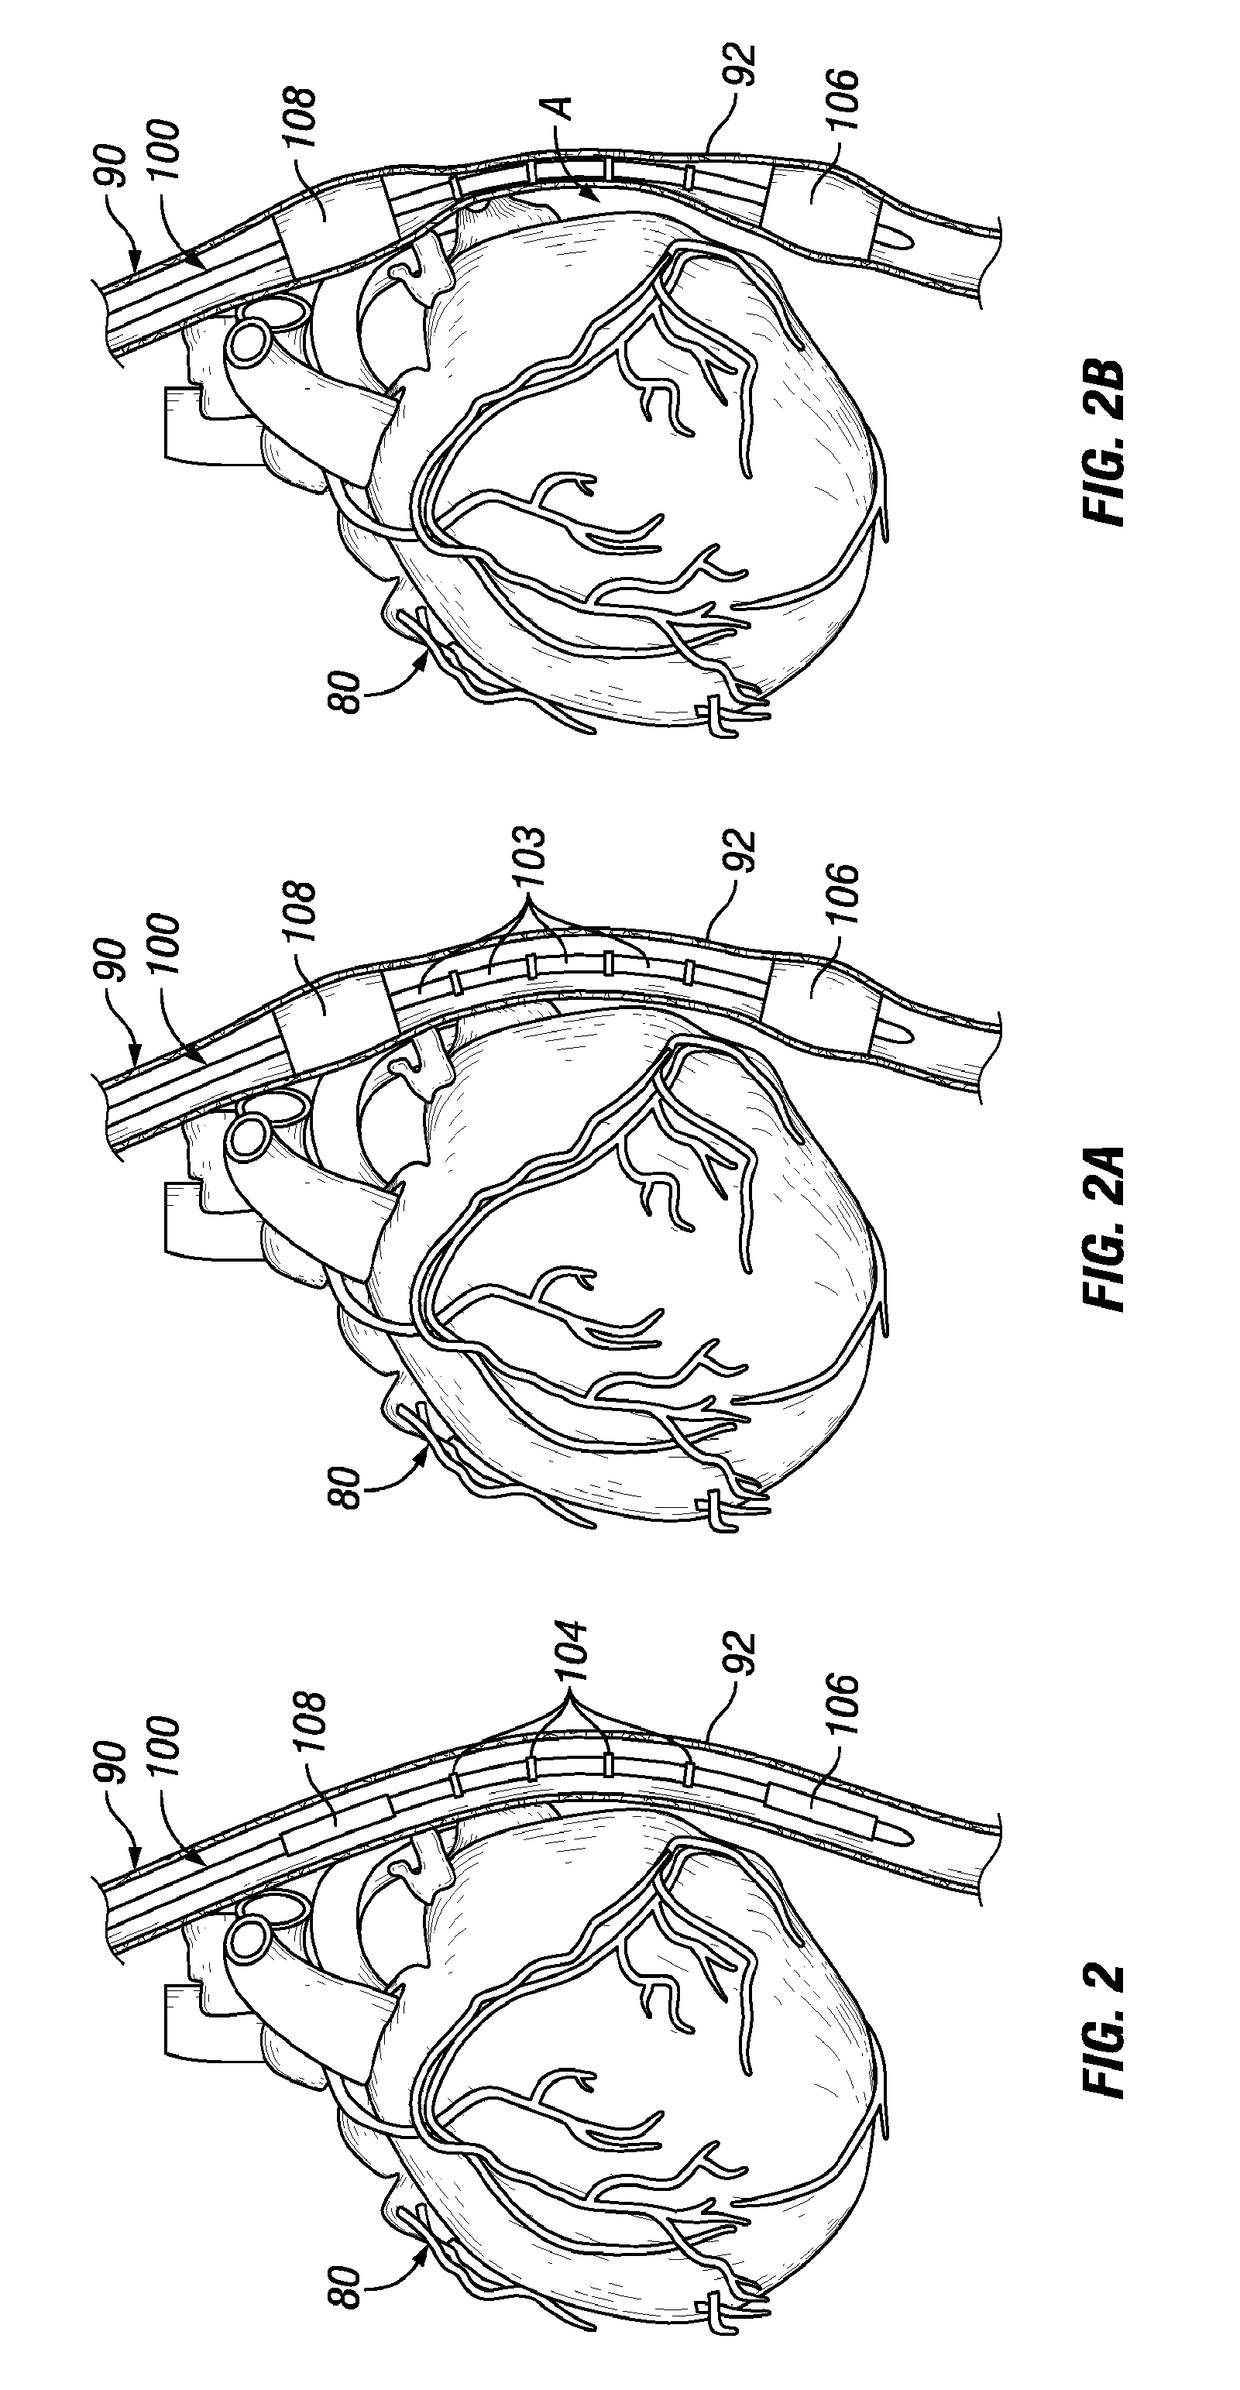 Esophageal Probes and Methods